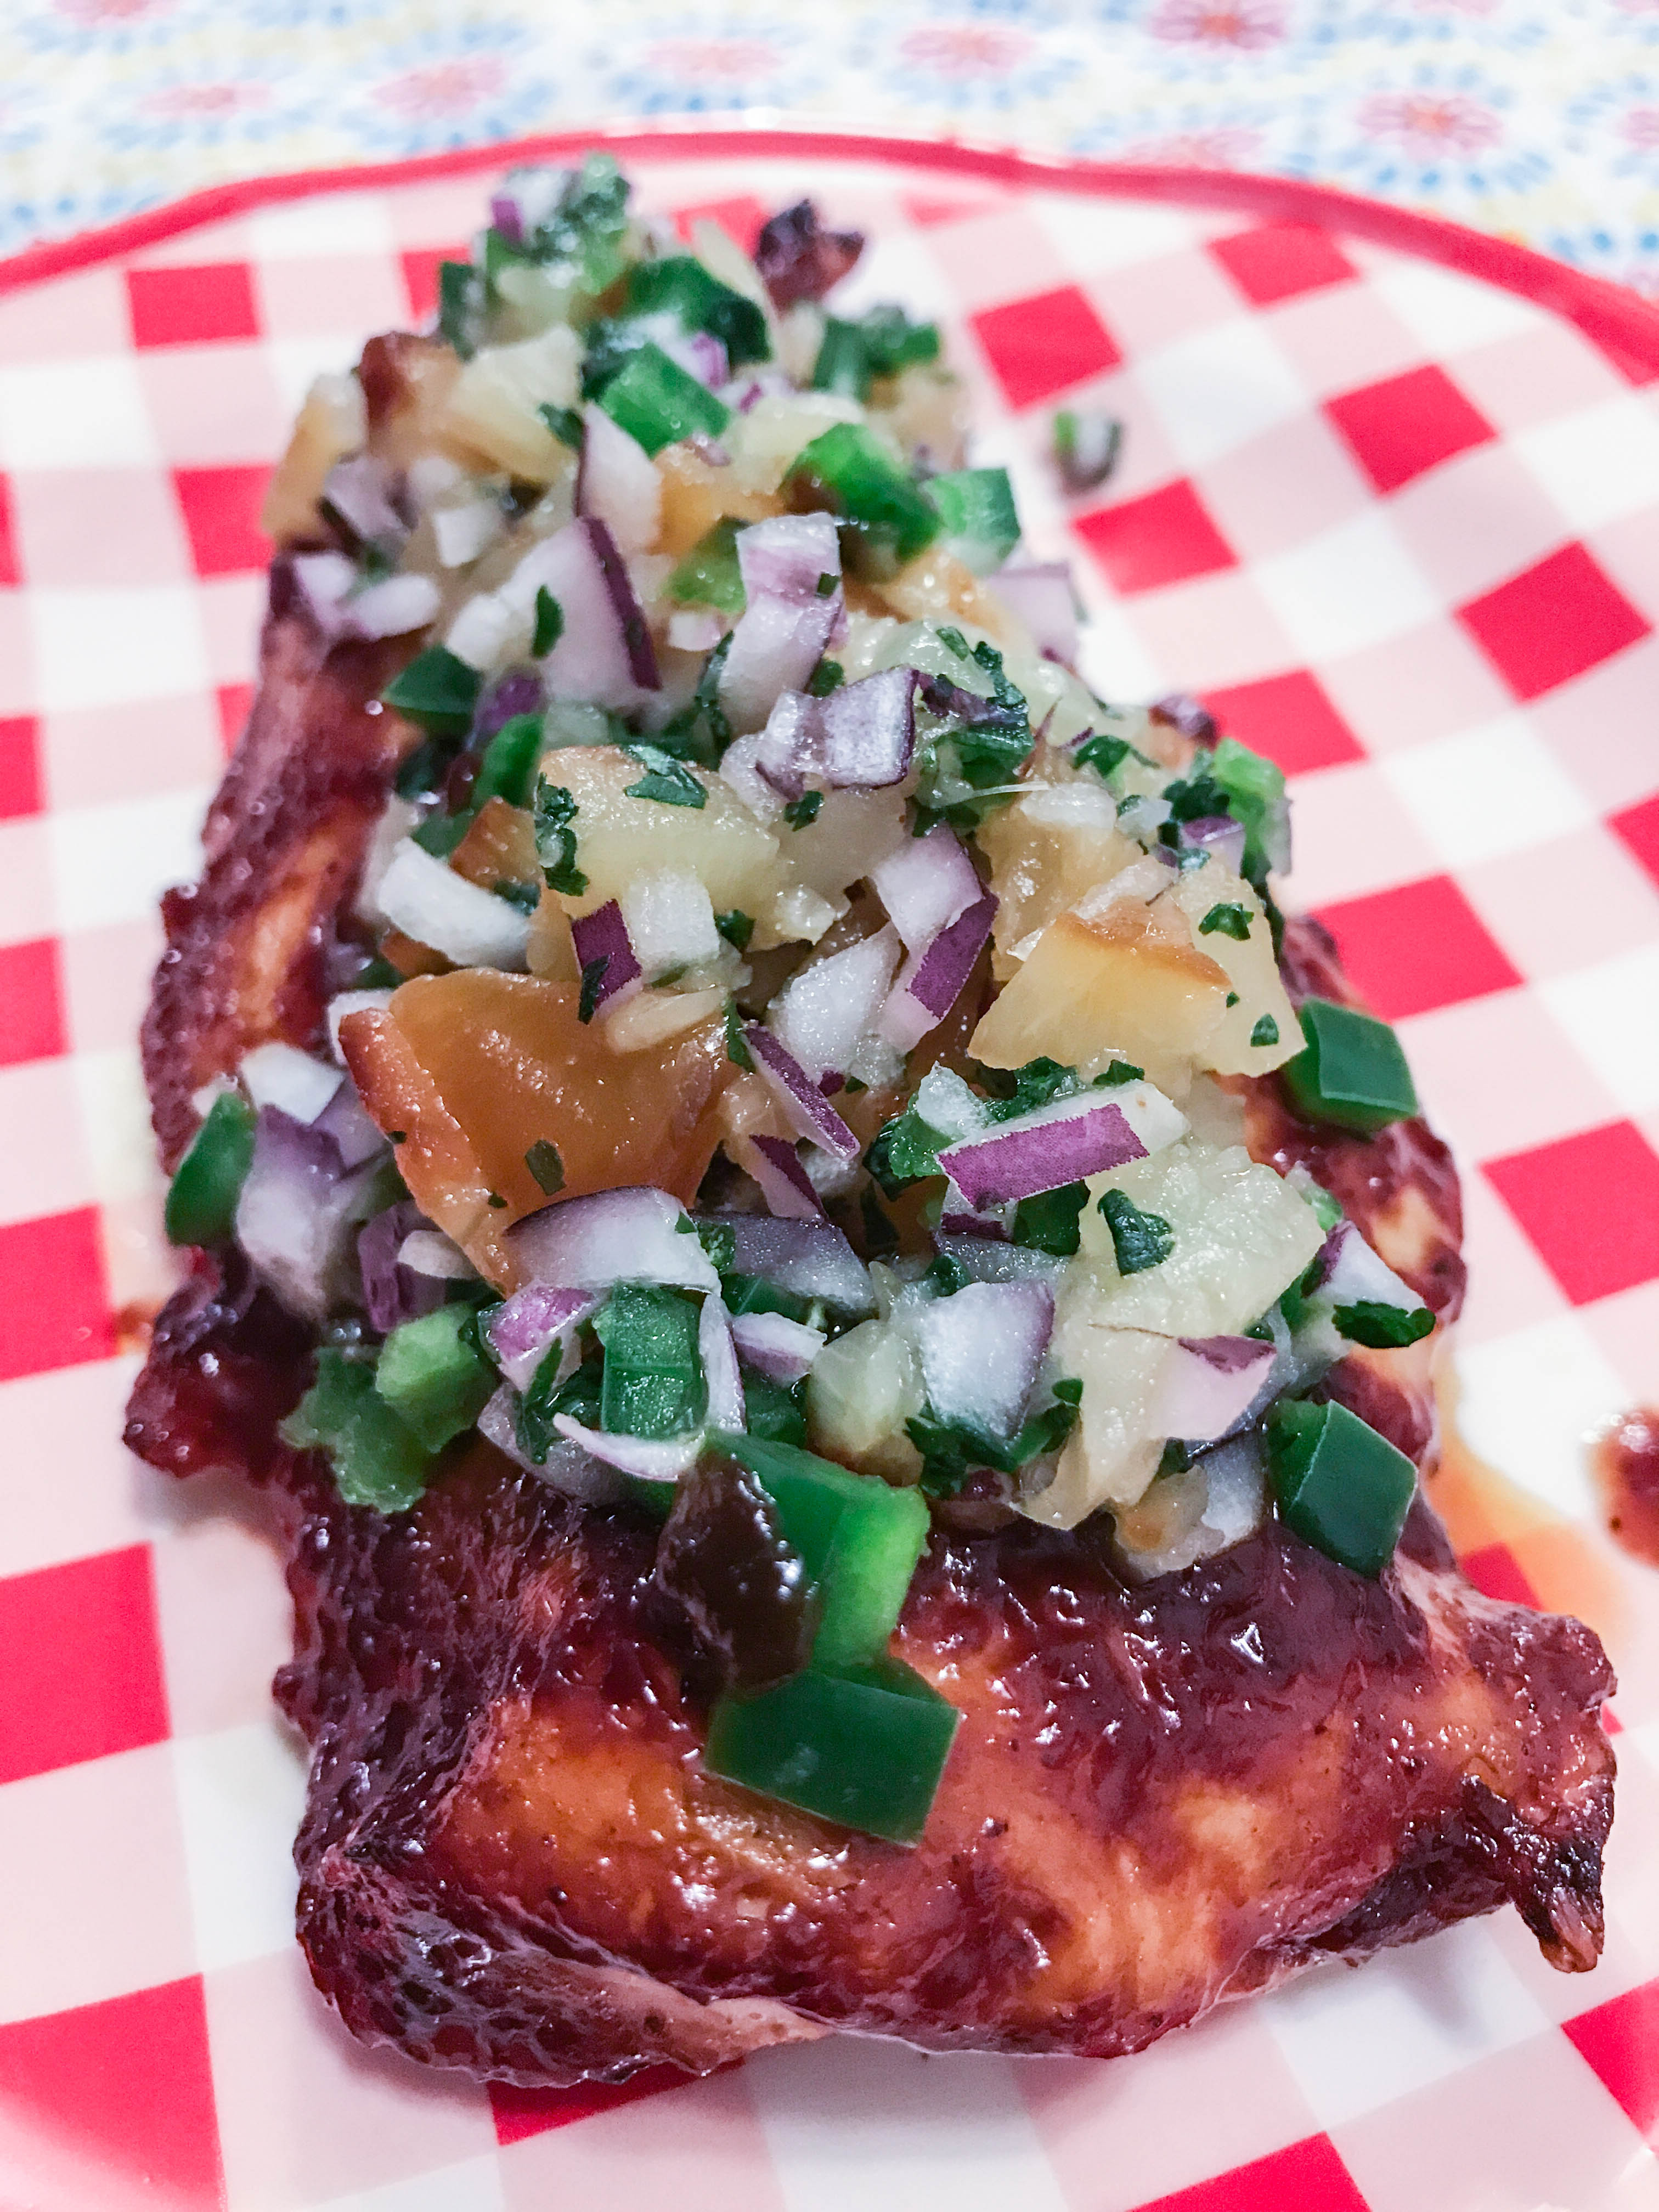 Honey jalapeno chicken breast topped with a big scoop of sweet pineapple salsa served on a red and white checked plate.